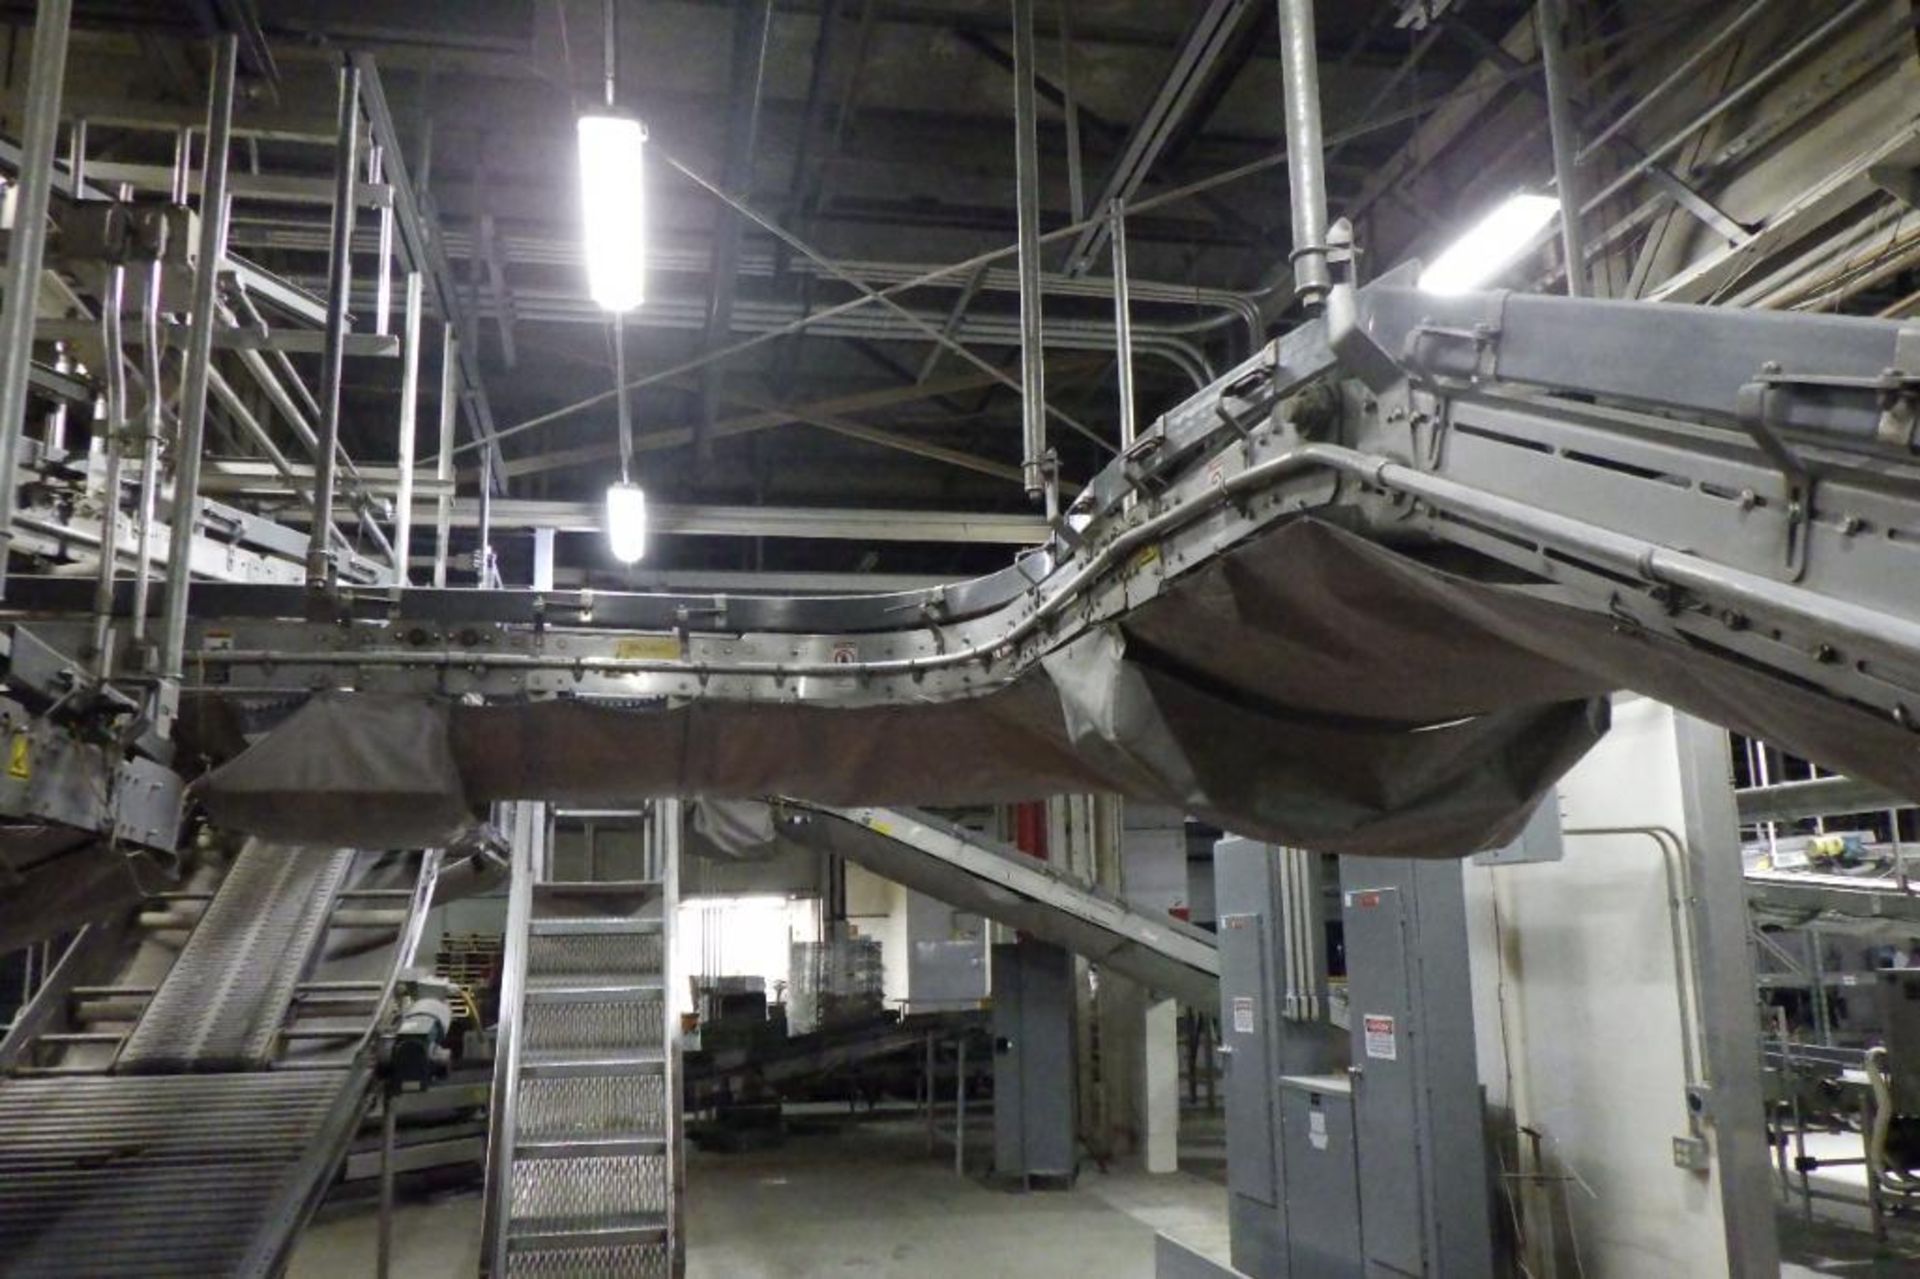 Stewart systems empty pan conveyor - Image 21 of 27